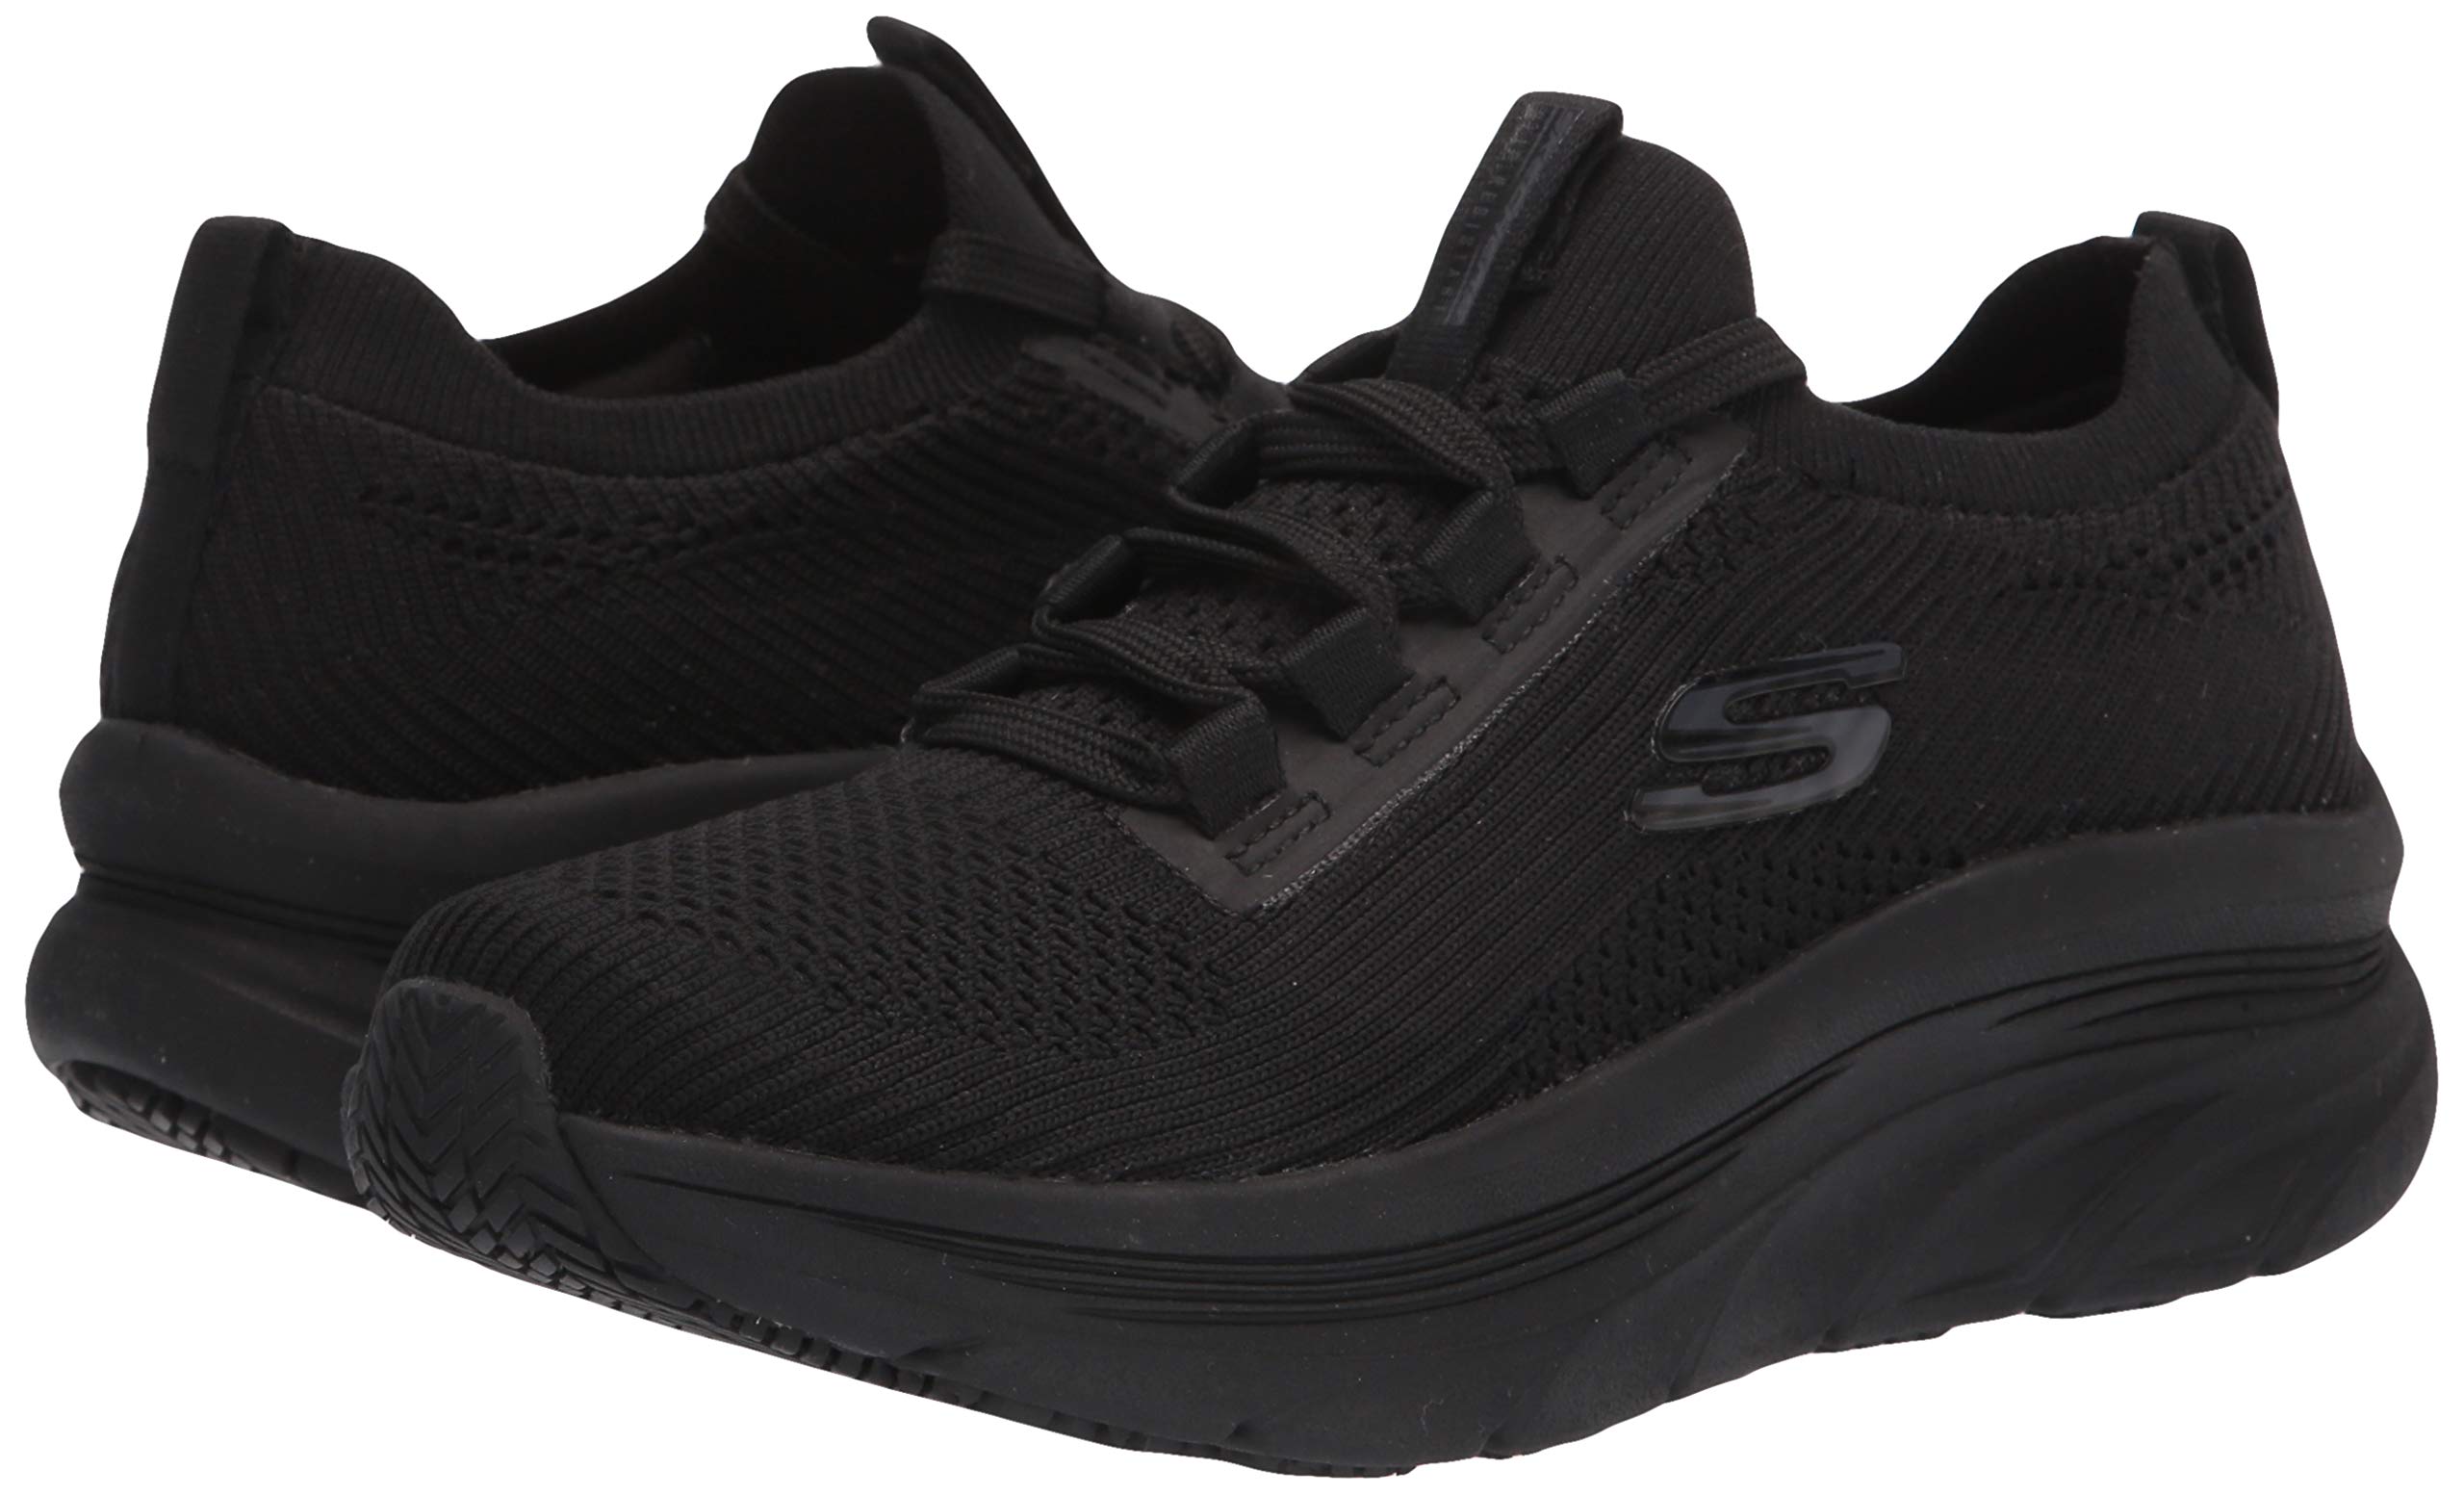 Skechers Women's Slip on Athletic Styling Health Care Professional Shoe